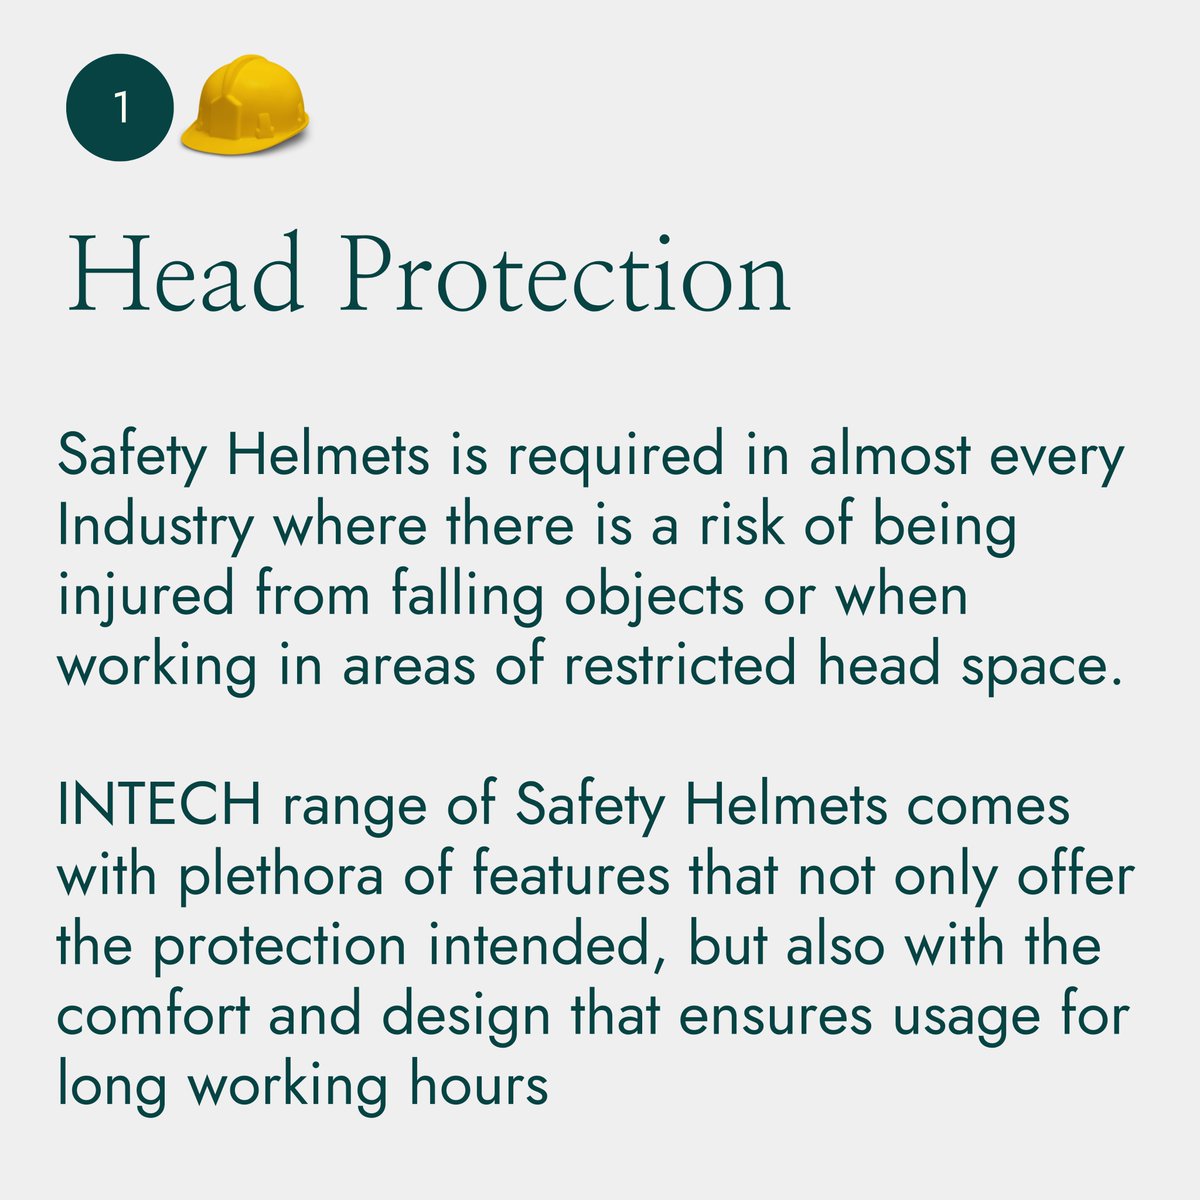 Safety Helmets is required in almost every Industry where there is a risk of being injured from falling objects or when working in areas of restricted head space.

#HeadProtection #SafetyHelmet #HardHat #ProtectiveHeadgear
#HeadSafety #HelmetSafety #ProtectYourHead